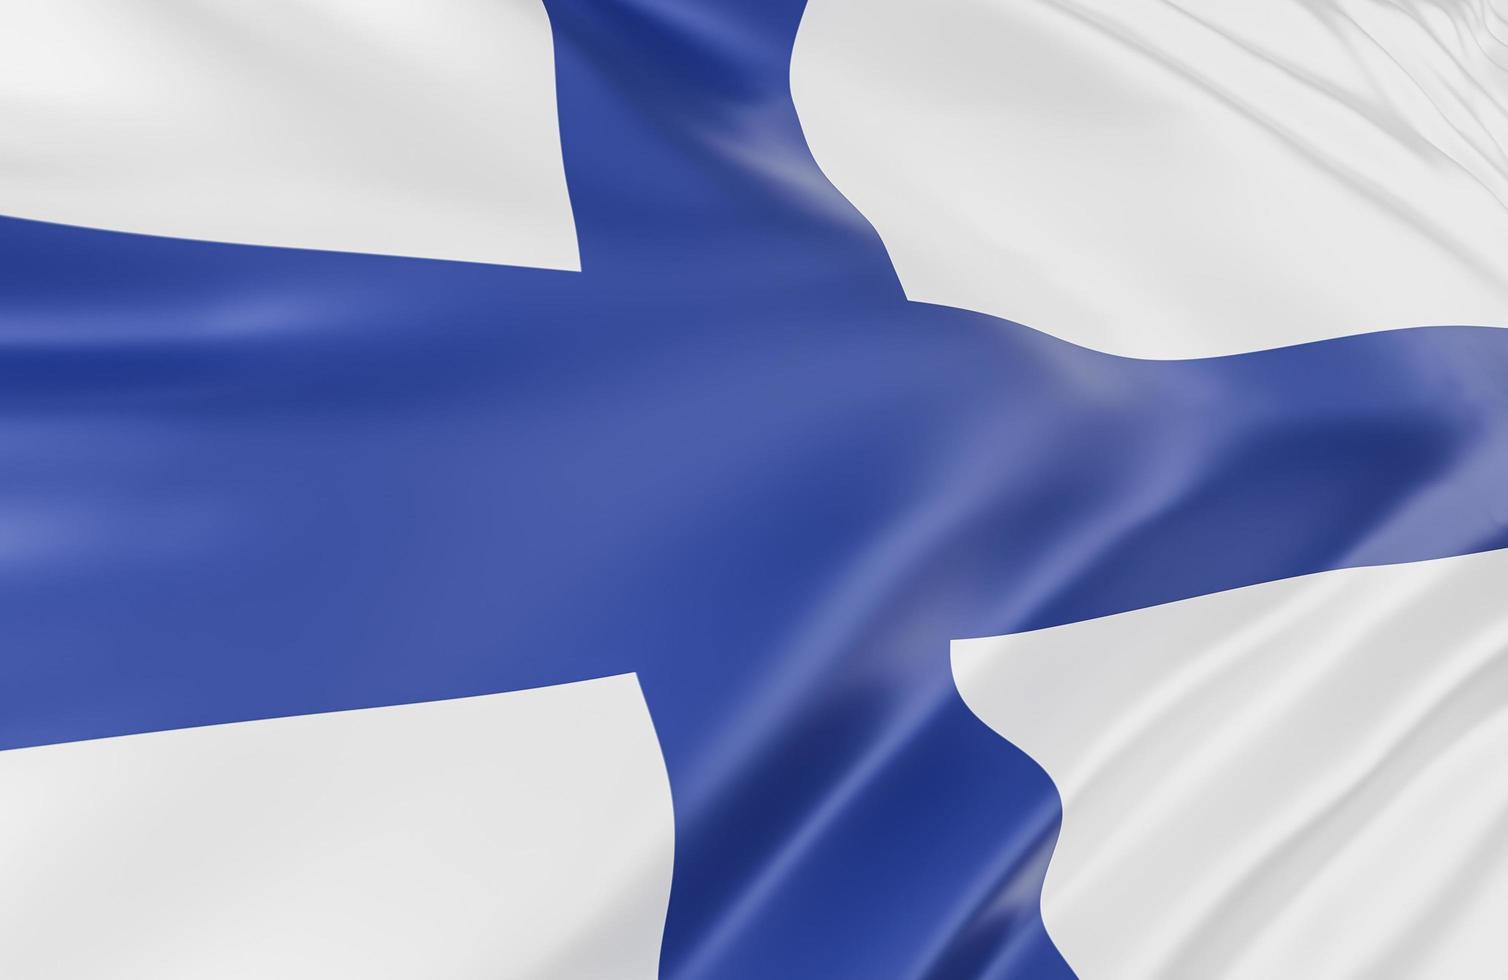 Beautiful Finland Flag Wave Close Up on banner background with copy space.,3d model and illustration. photo